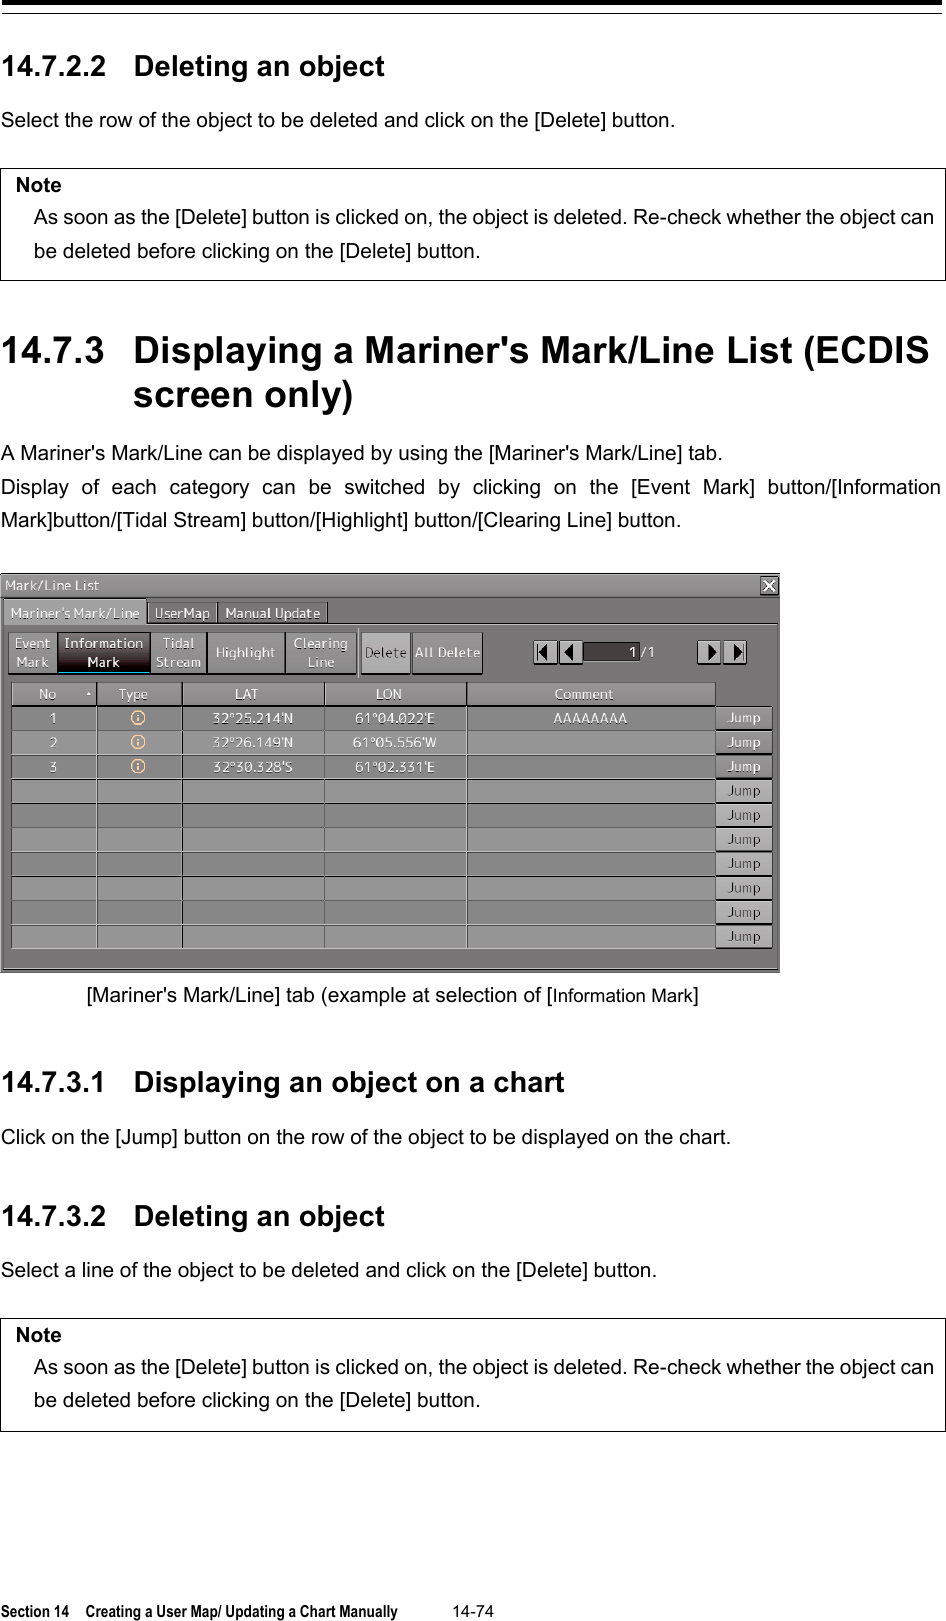  Section 14  Creating a User Map/ Updating a Chart Manually 14-74  14.7.2.2 Deleting an object Select the row of the object to be deleted and click on the [Delete] button.  Note As soon as the [Delete] button is clicked on, the object is deleted. Re-check whether the object can be deleted before clicking on the [Delete] button.   14.7.3 Displaying a Mariner&apos;s Mark/Line List (ECDIS screen only) A Mariner&apos;s Mark/Line can be displayed by using the [Mariner&apos;s Mark/Line] tab. Display of each category can be switched by clicking on the [Event Mark] button/[Information Mark]button/[Tidal Stream] button/[Highlight] button/[Clearing Line] button.     14.7.3.1 Displaying an object on a chart Click on the [Jump] button on the row of the object to be displayed on the chart.   14.7.3.2 Deleting an object Select a line of the object to be deleted and click on the [Delete] button.  Note As soon as the [Delete] button is clicked on, the object is deleted. Re-check whether the object can be deleted before clicking on the [Delete] button.    [Mariner&apos;s Mark/Line] tab (example at selection of [Information Mark] 